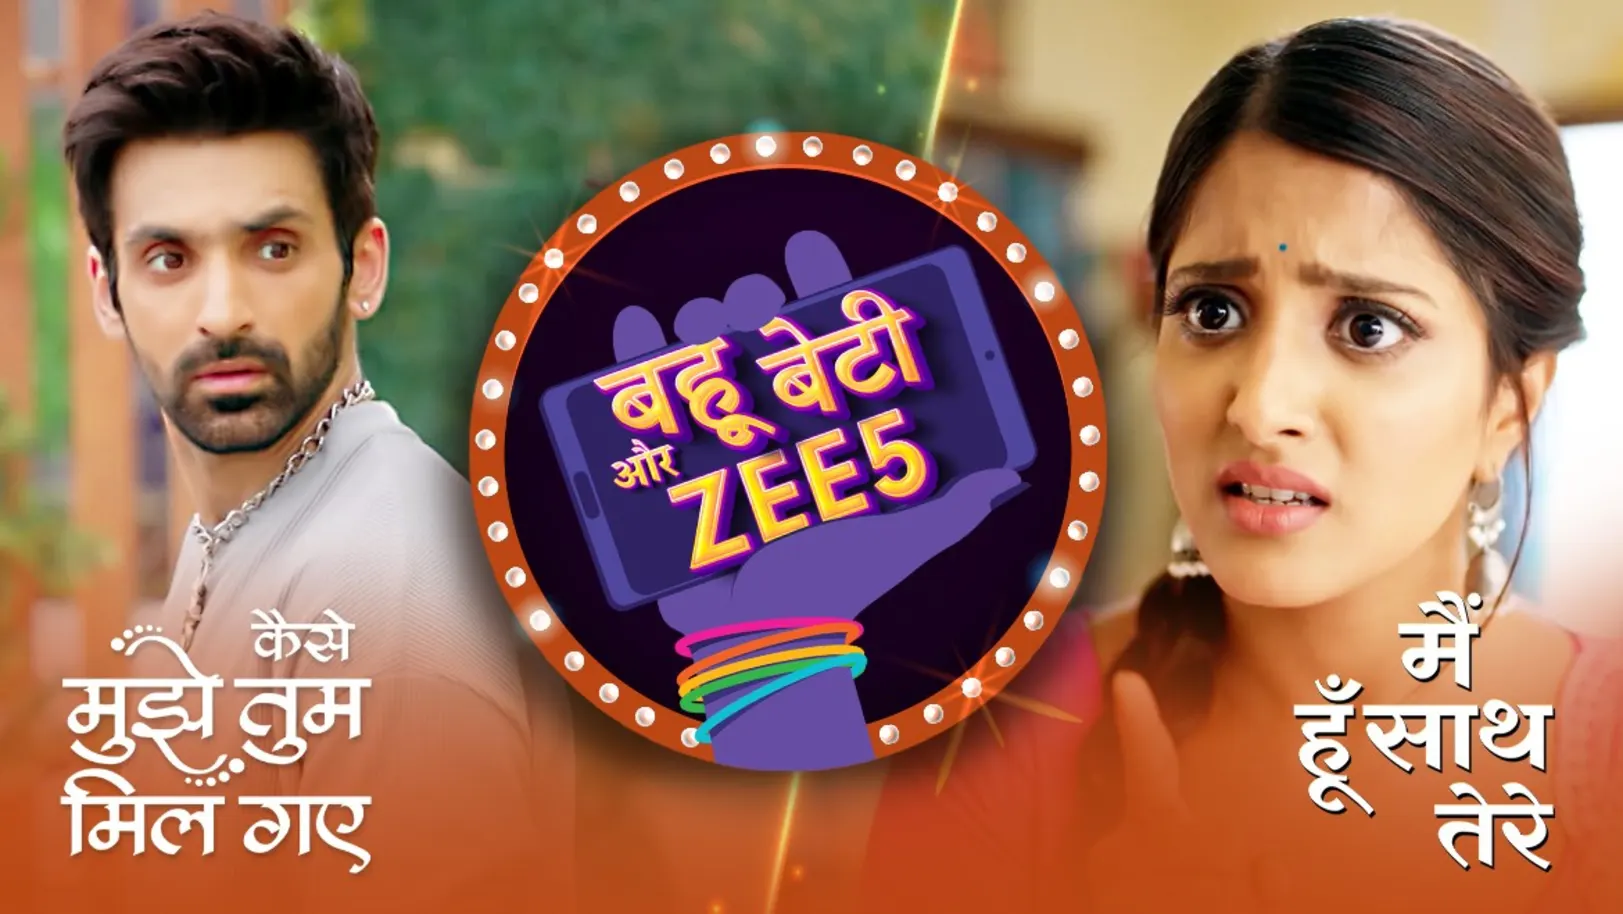 Rising Indifferences in the Relationships | Bahu Beti Aur ZEE5 Episode 18